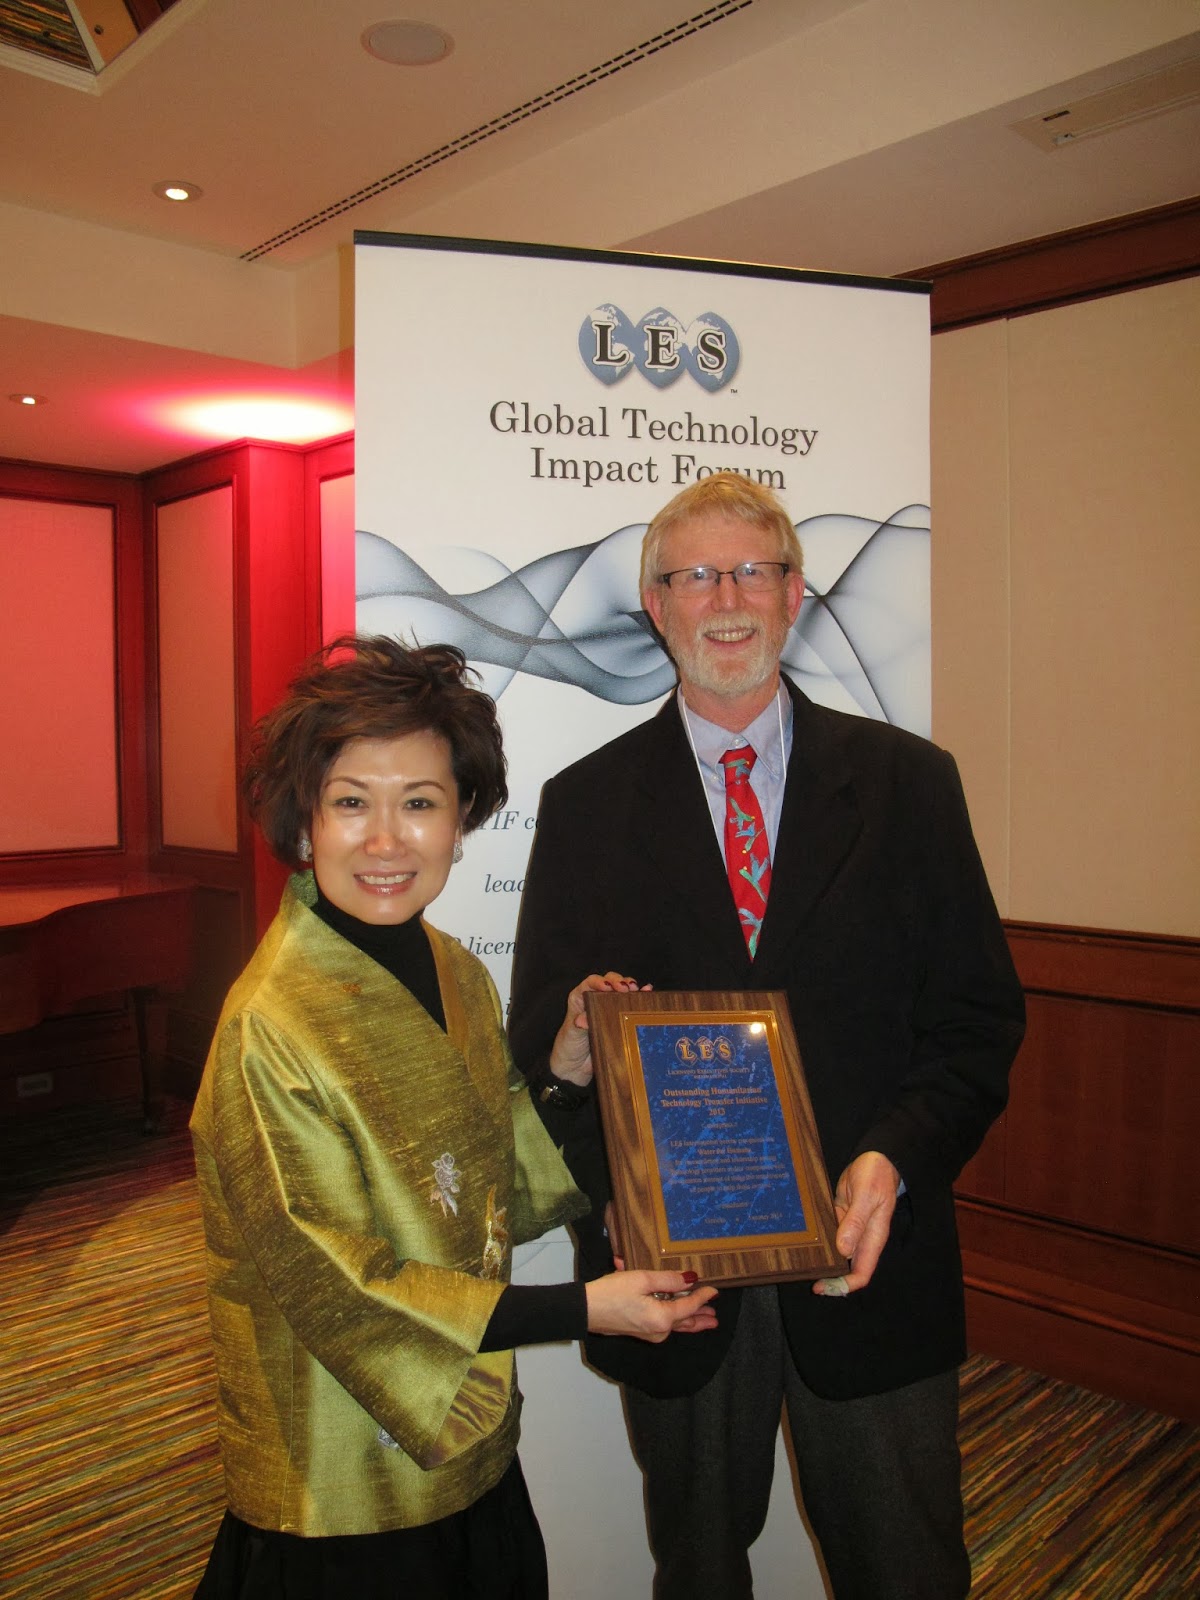 Award for our Clean Cookstove Program at the GTIF conference in Geneva